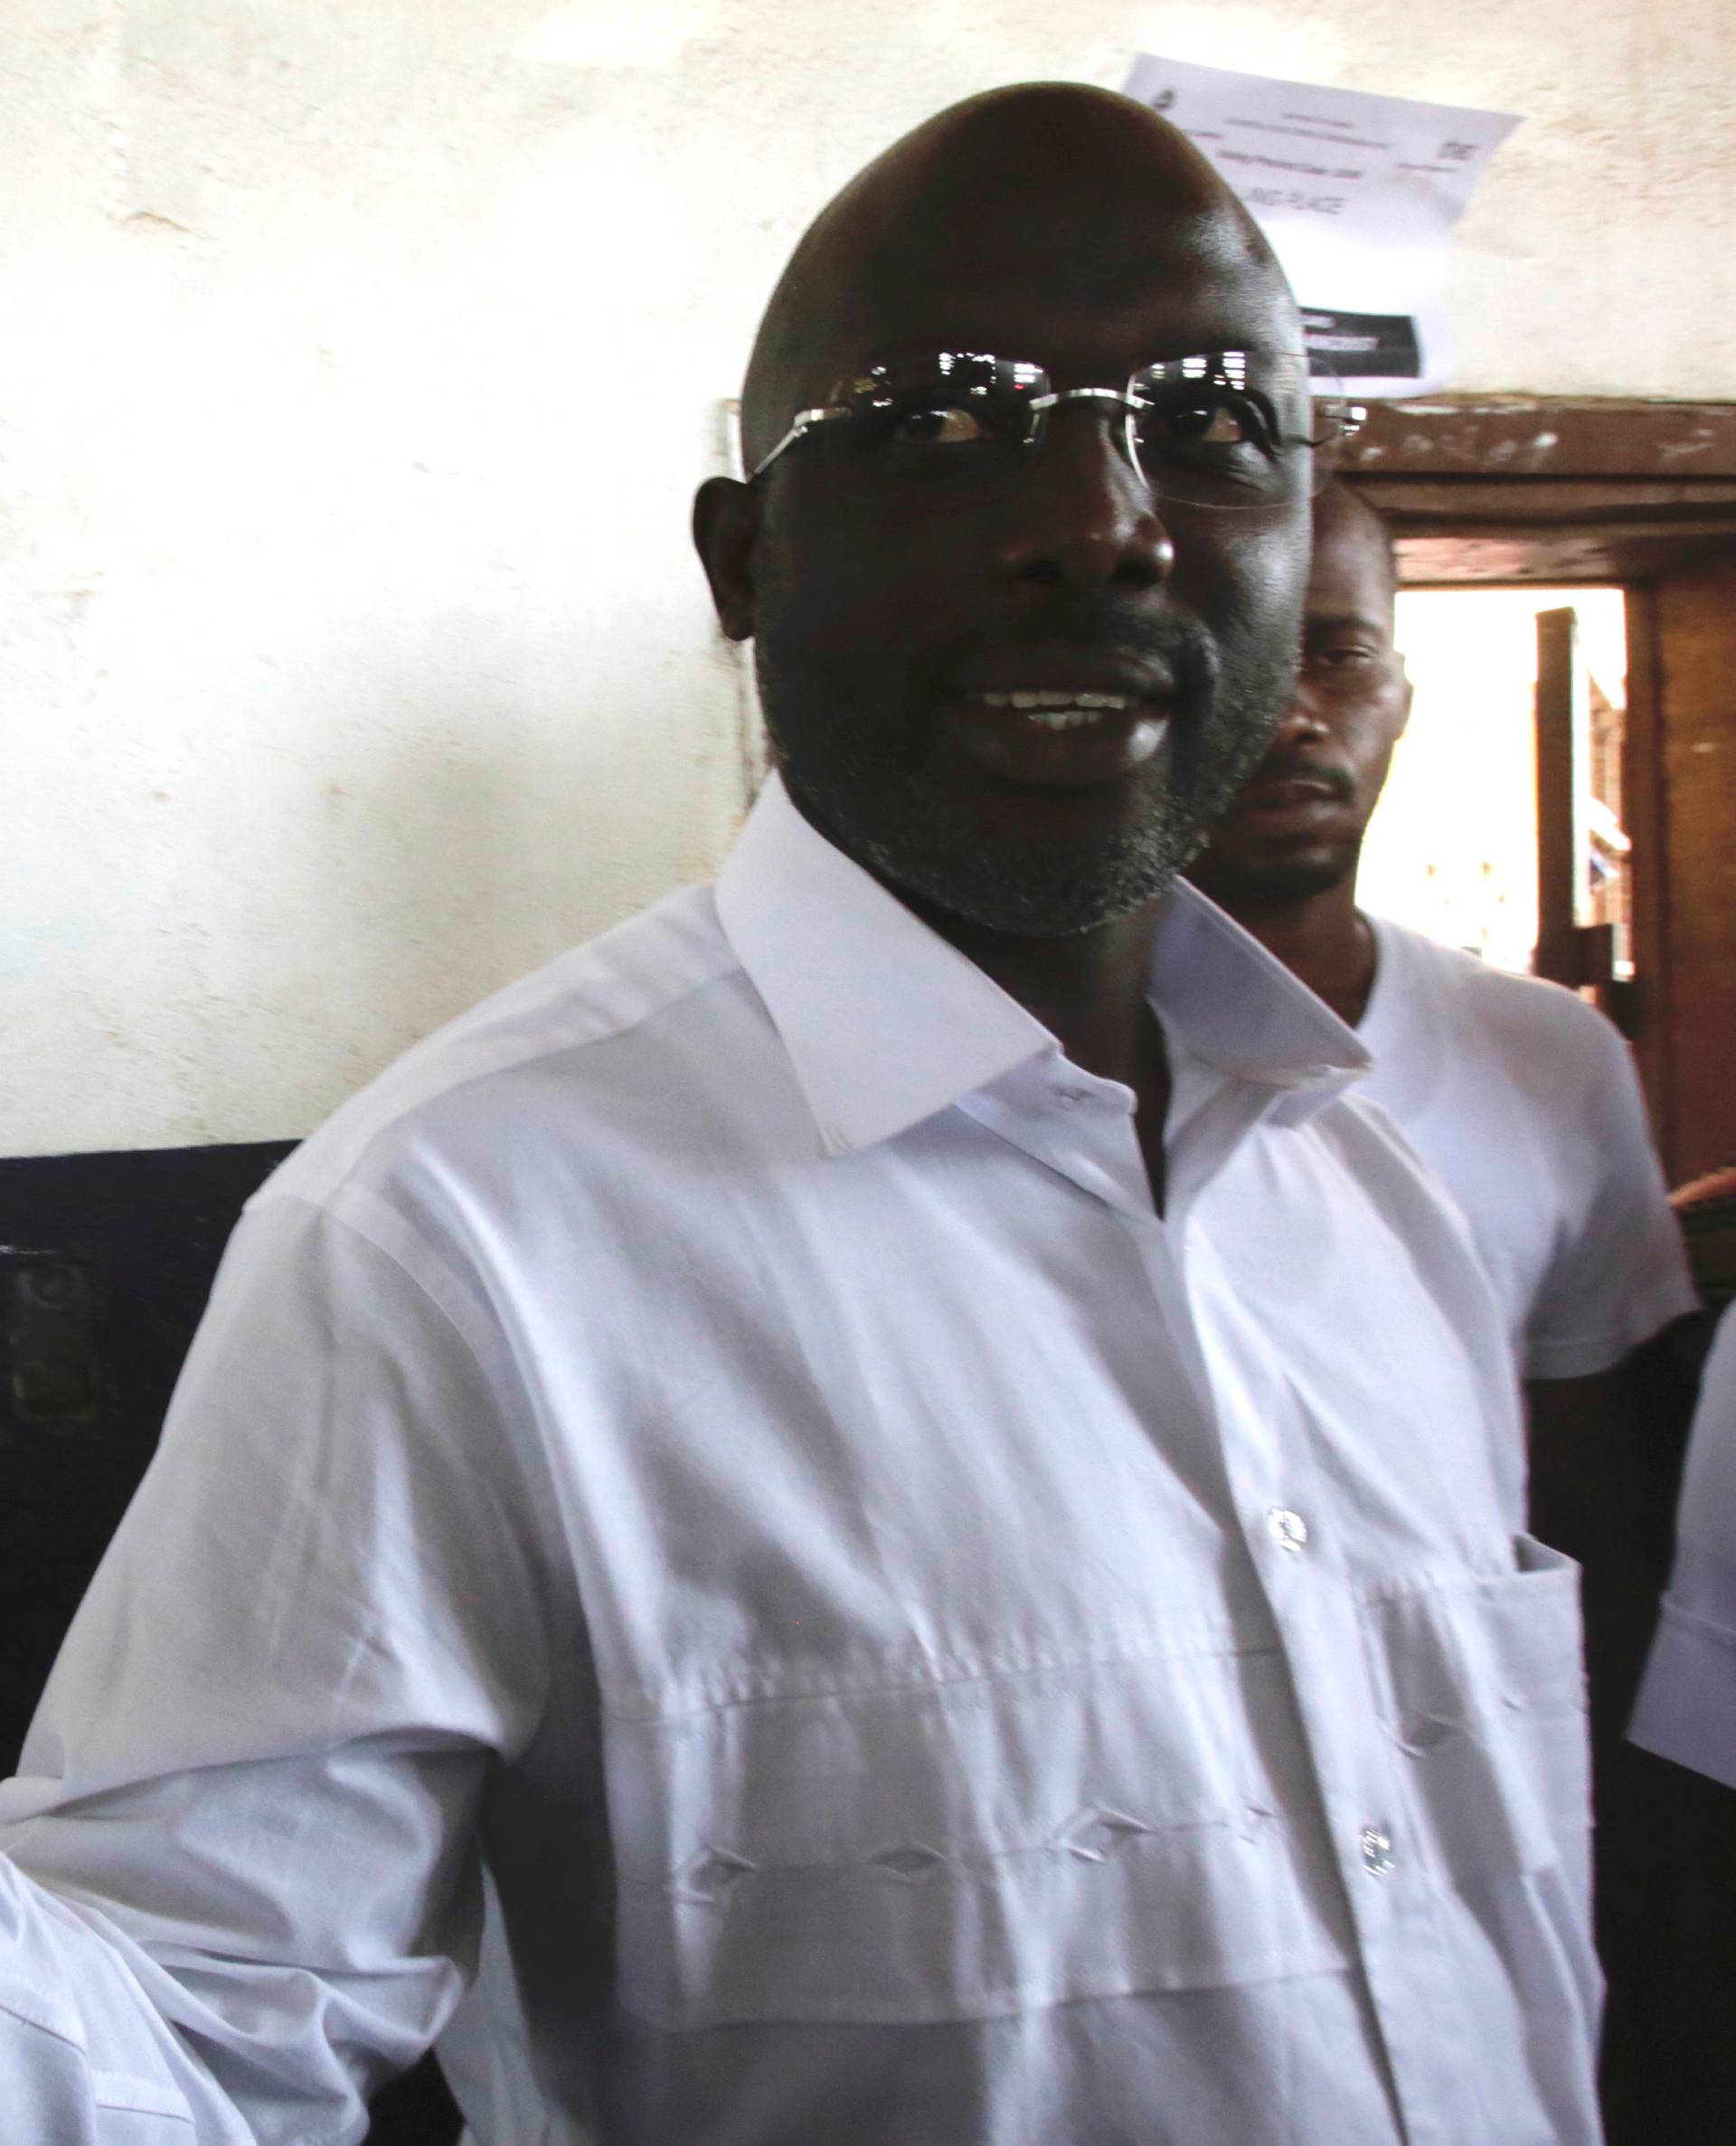 Weah, former soccer player and presidential candidate of CDC shows his voter's card in Monrovia